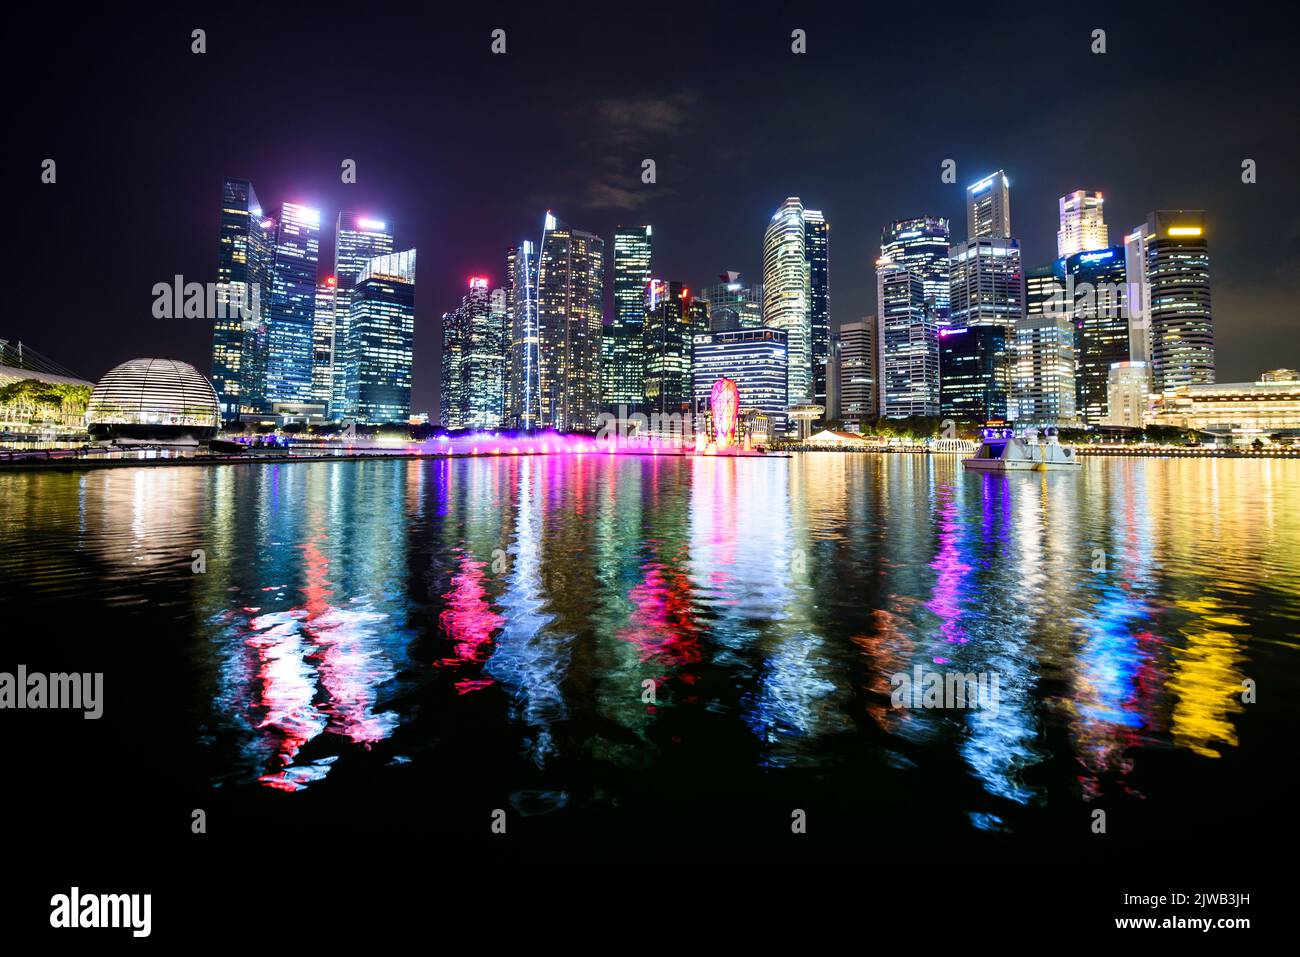 Night view of downtown skyscrapers at Marina Bay, Singapore Stock Photo